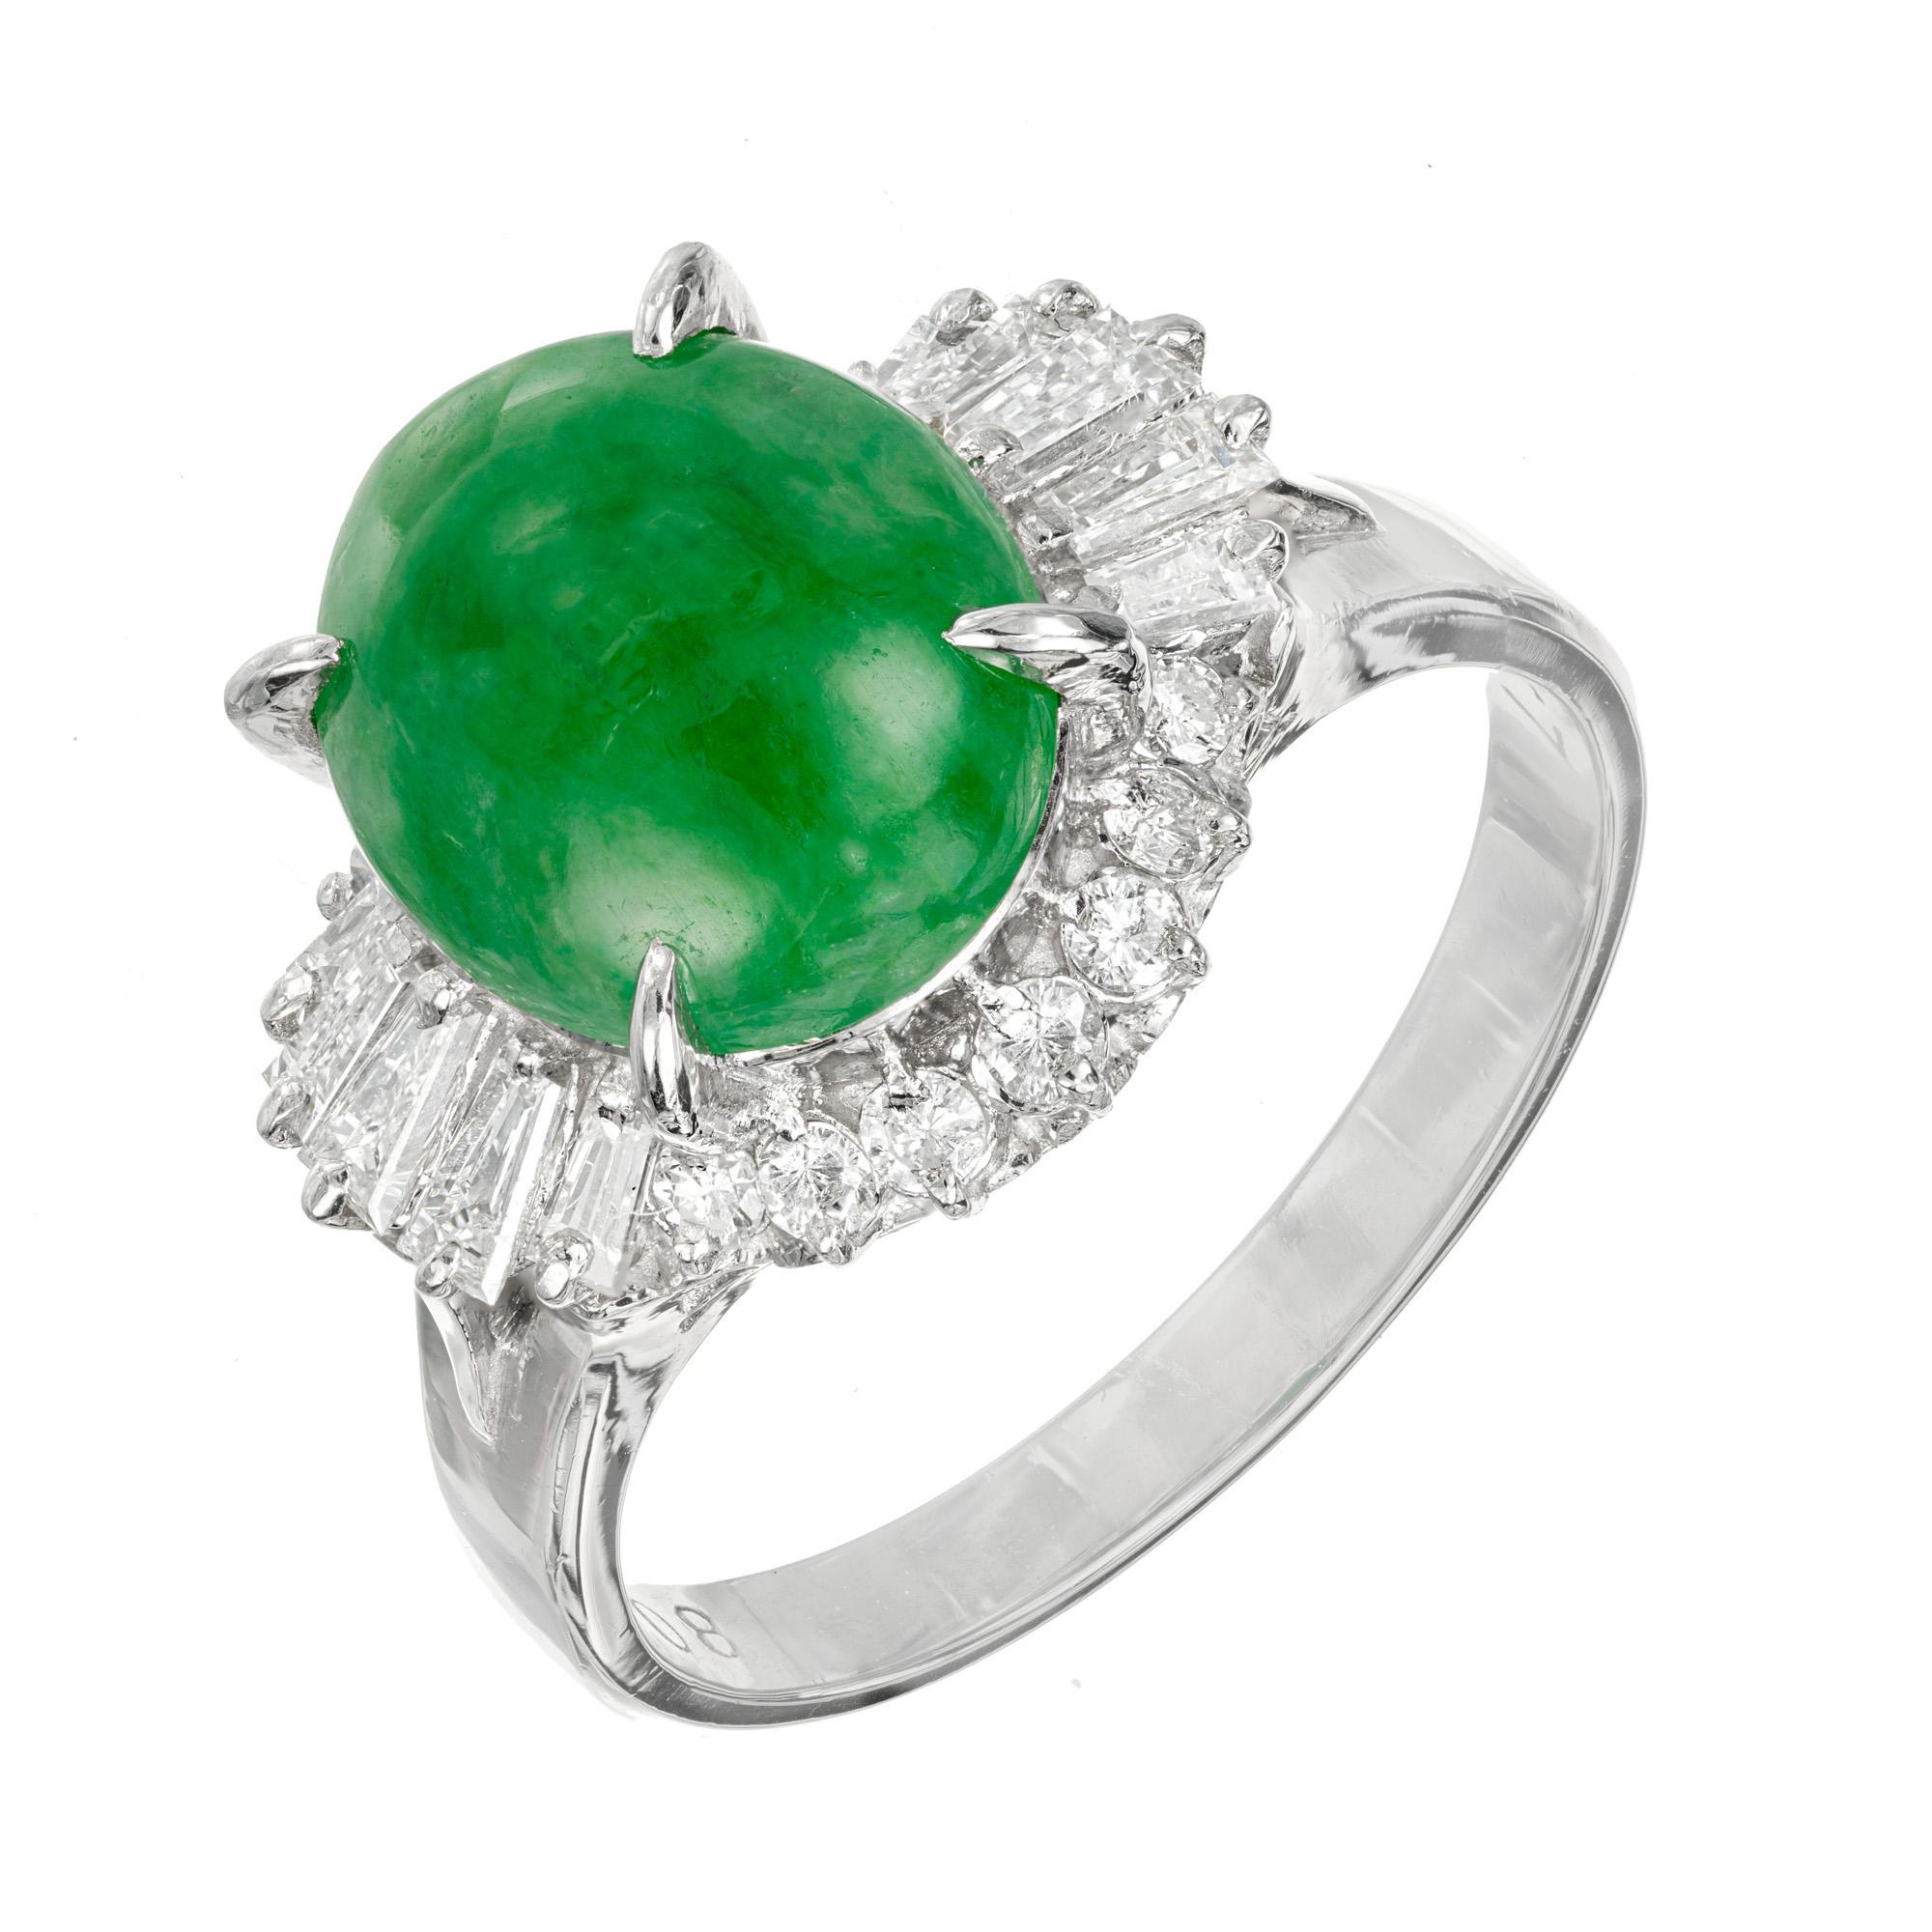 Jadeite Jade and diamond ring. GIA certified oval cabochon natural Jade center stone, in a platinum ballerina setting with a halo of round and baguette diamonds. The jade is certified natural, no indications of impregnations. 

1 oval jadeite jade